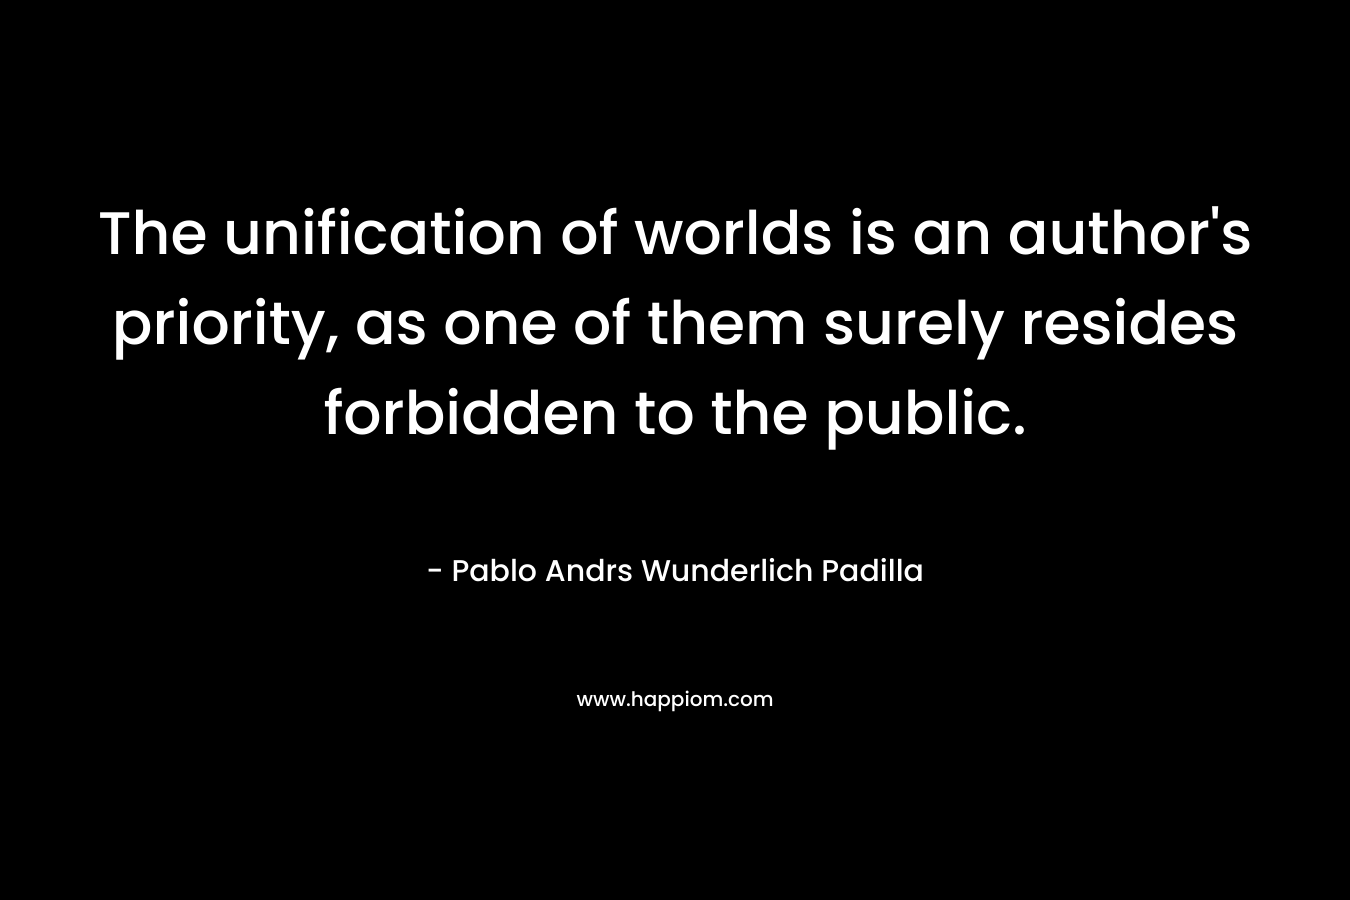 The unification of worlds is an author’s priority, as one of them surely resides forbidden to the public. – Pablo Andrs Wunderlich Padilla